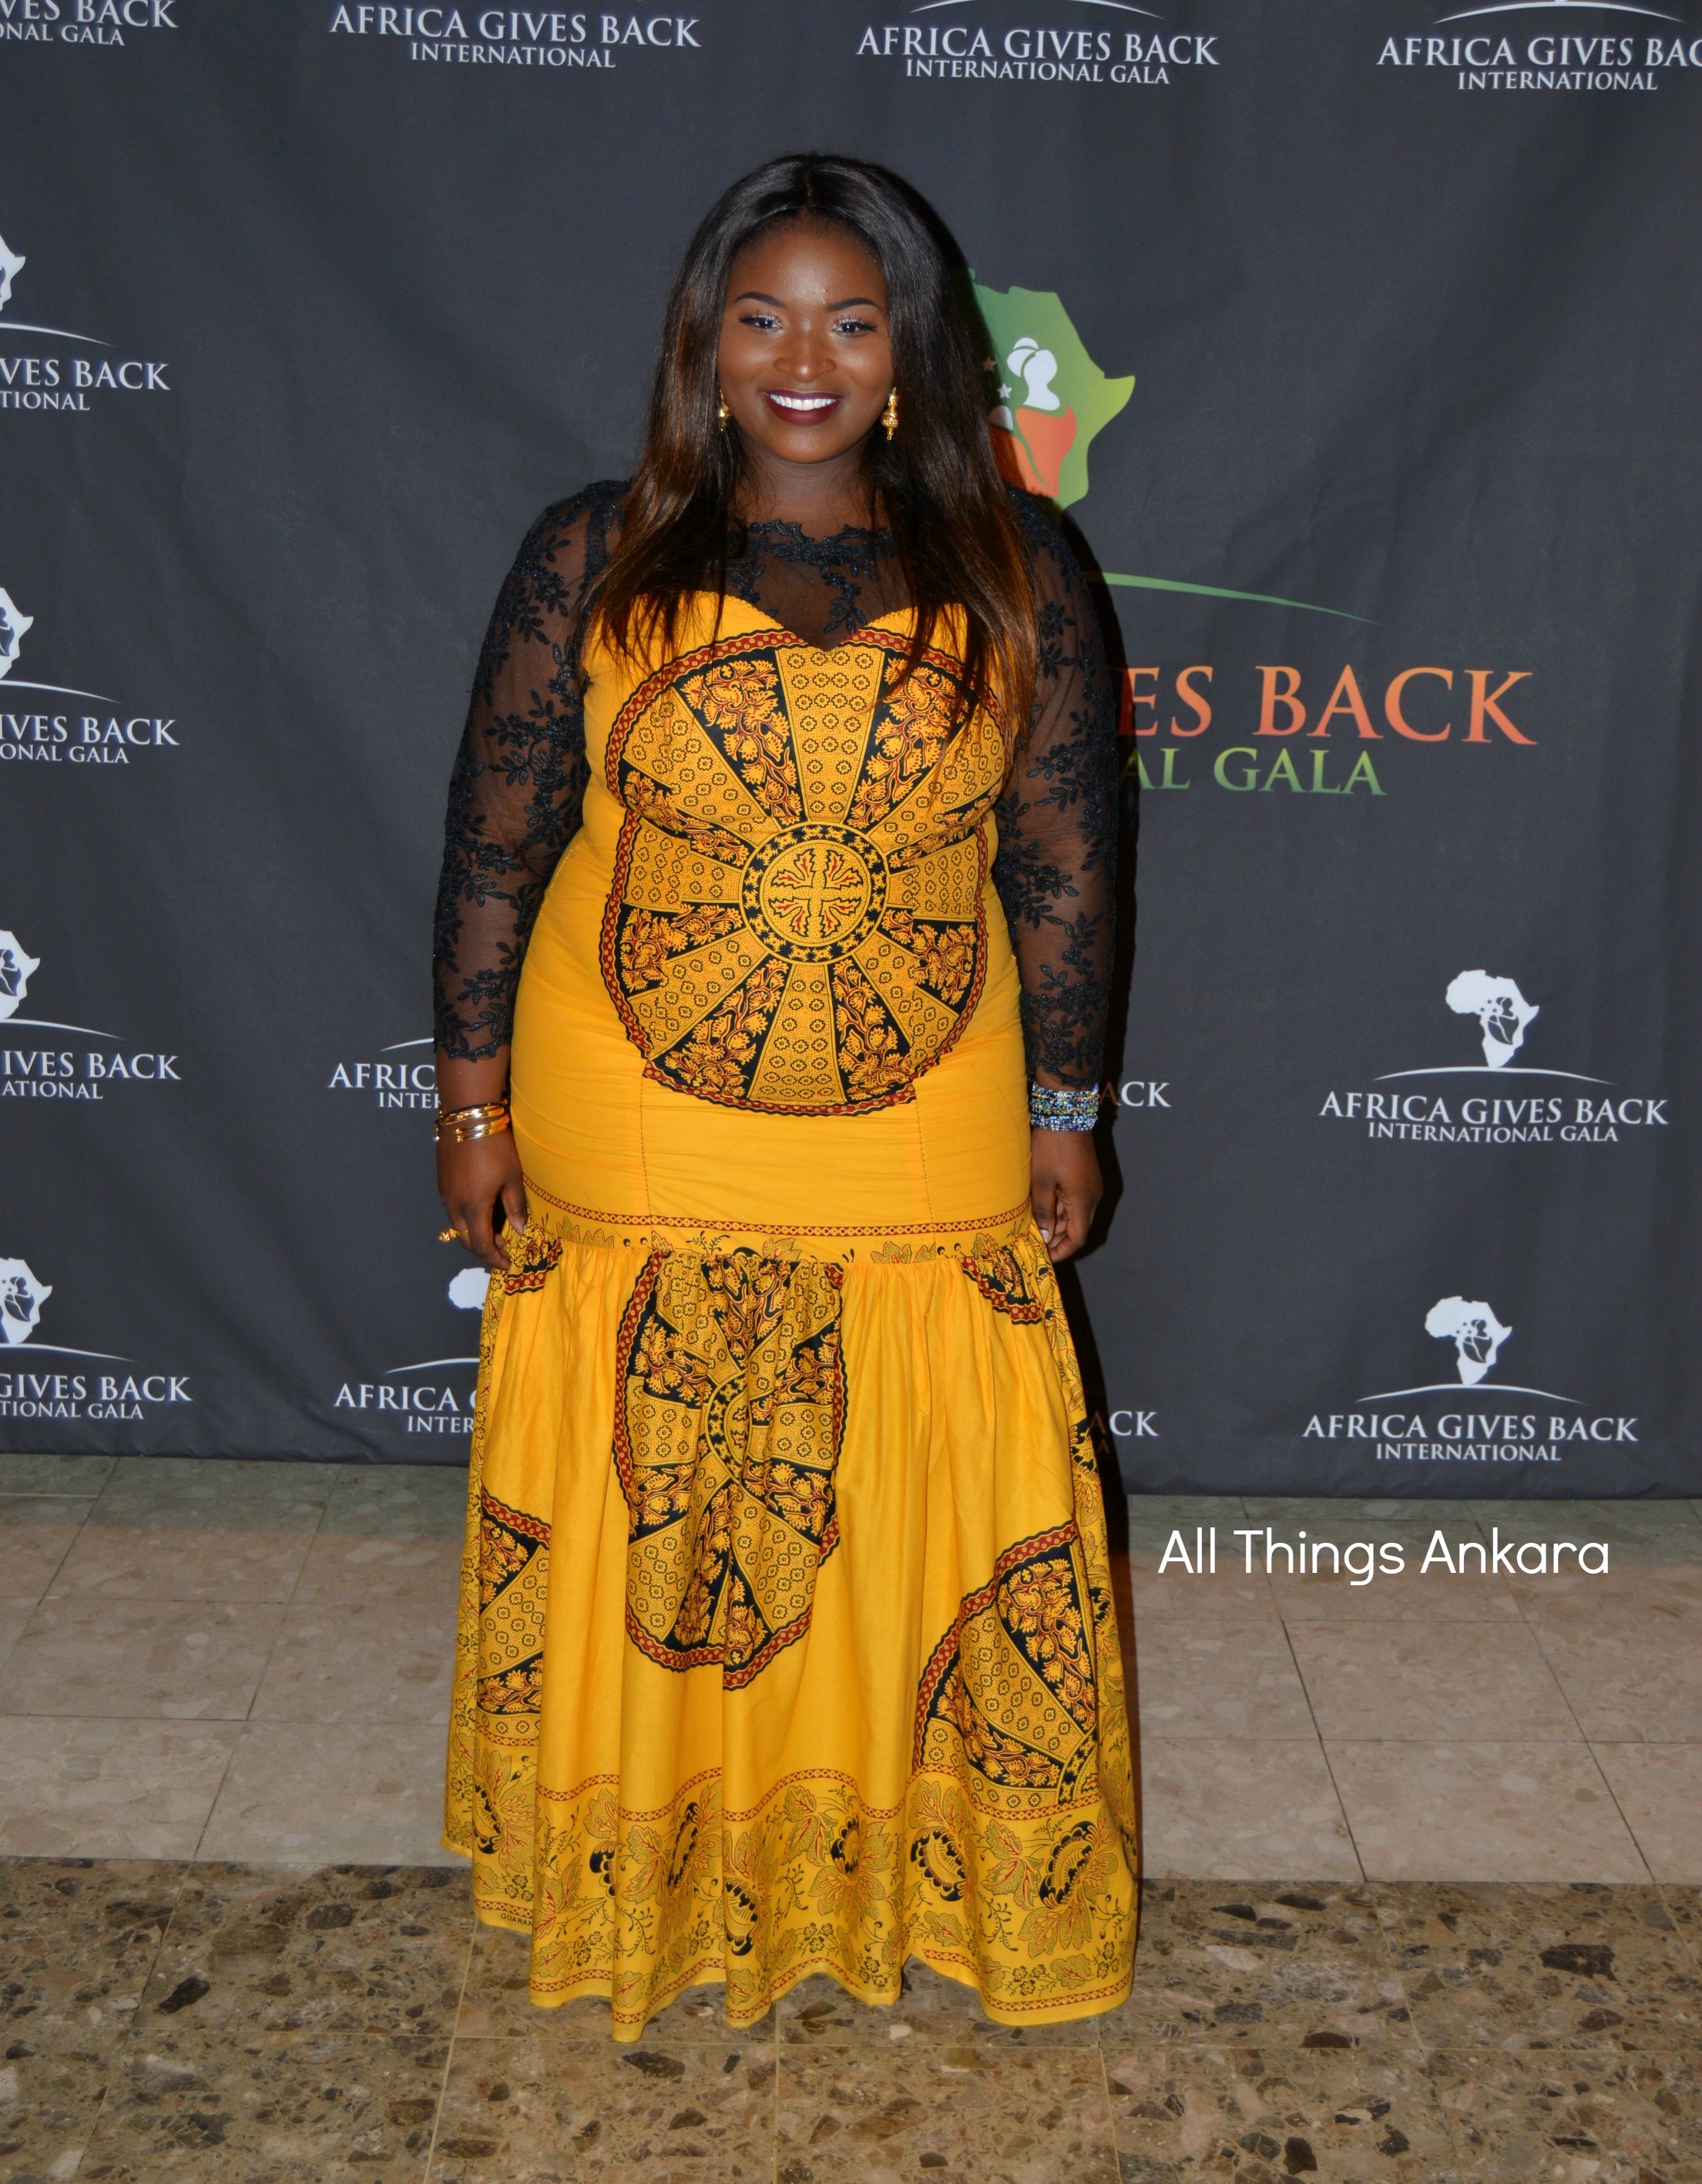 Gala-All Things Ankara's Best Dressed Women at Africa Gives Back International Gala 2016 4